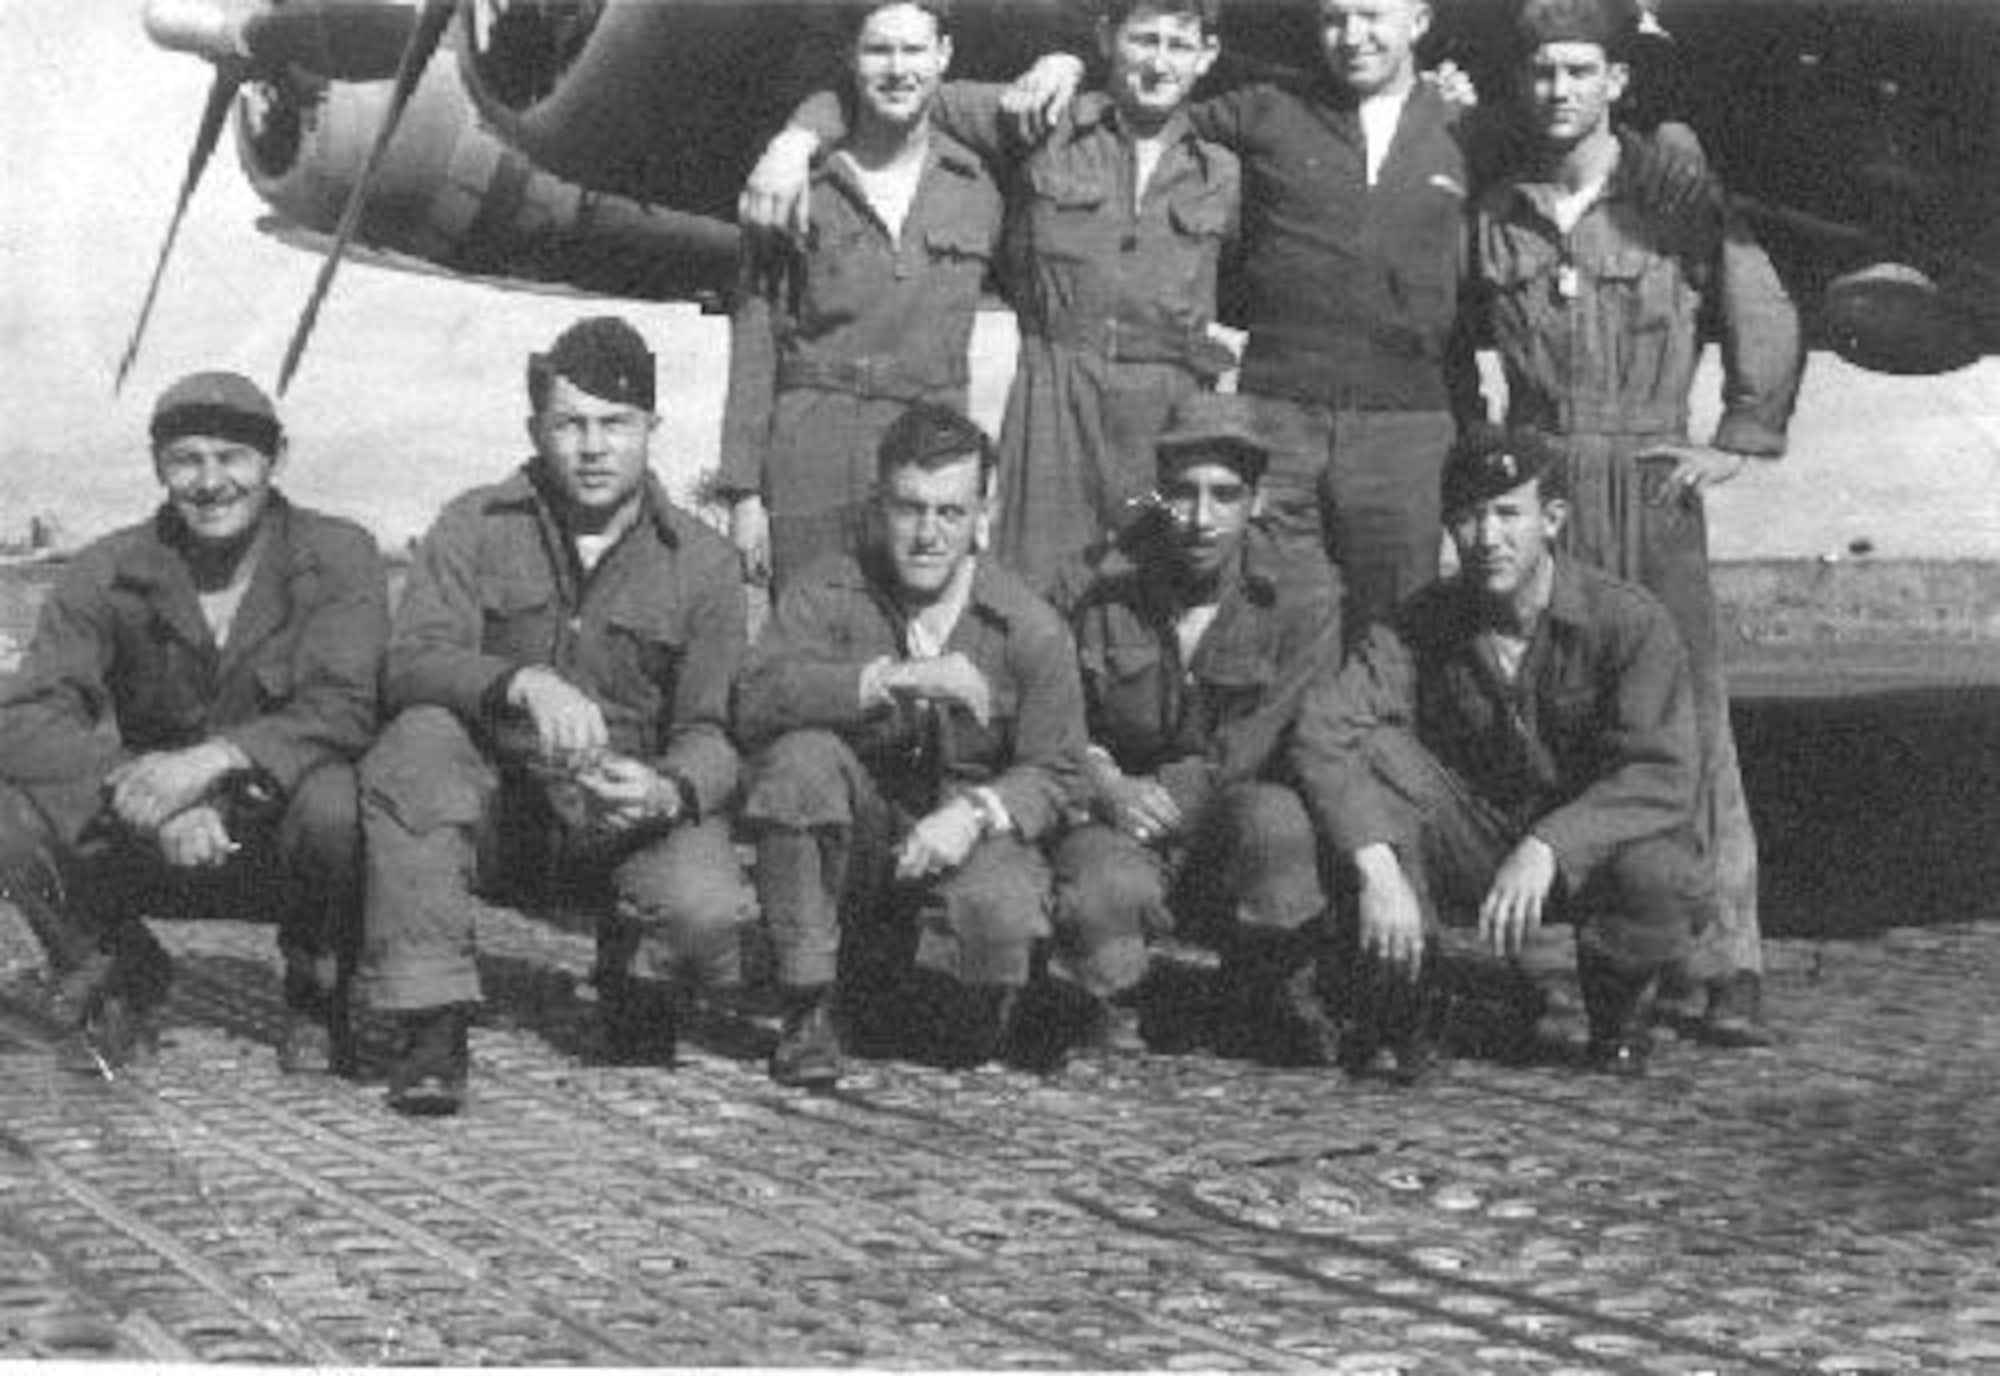 Former Staff Sgt. Lewis Herron, top left, 350th Bomb Squadron tail gunner, poses with the rest of his crew from the “Heaven Sent” B-17 Flying Fortress, standing from left to right, Tech. Sgt. Glenn Smiley, 2nd Lt. Gerald Klecker and Tech. Sgt. William Jarrell; kneeling left to right, Tech. Sgt. Michael Garemko, 1st Lt. Tom Anderson, Staff Sgt. Angelo Cioffi and 1st Lt. Fred Schmidt, during their time stationed at Thorpe Abbots, England, during World War II. The 100th BG became nicknamed “The Bloody Hundredth” after suffering significant losses. (Courtesy photo provided by the 100th Bomb Group Foundation/Released)